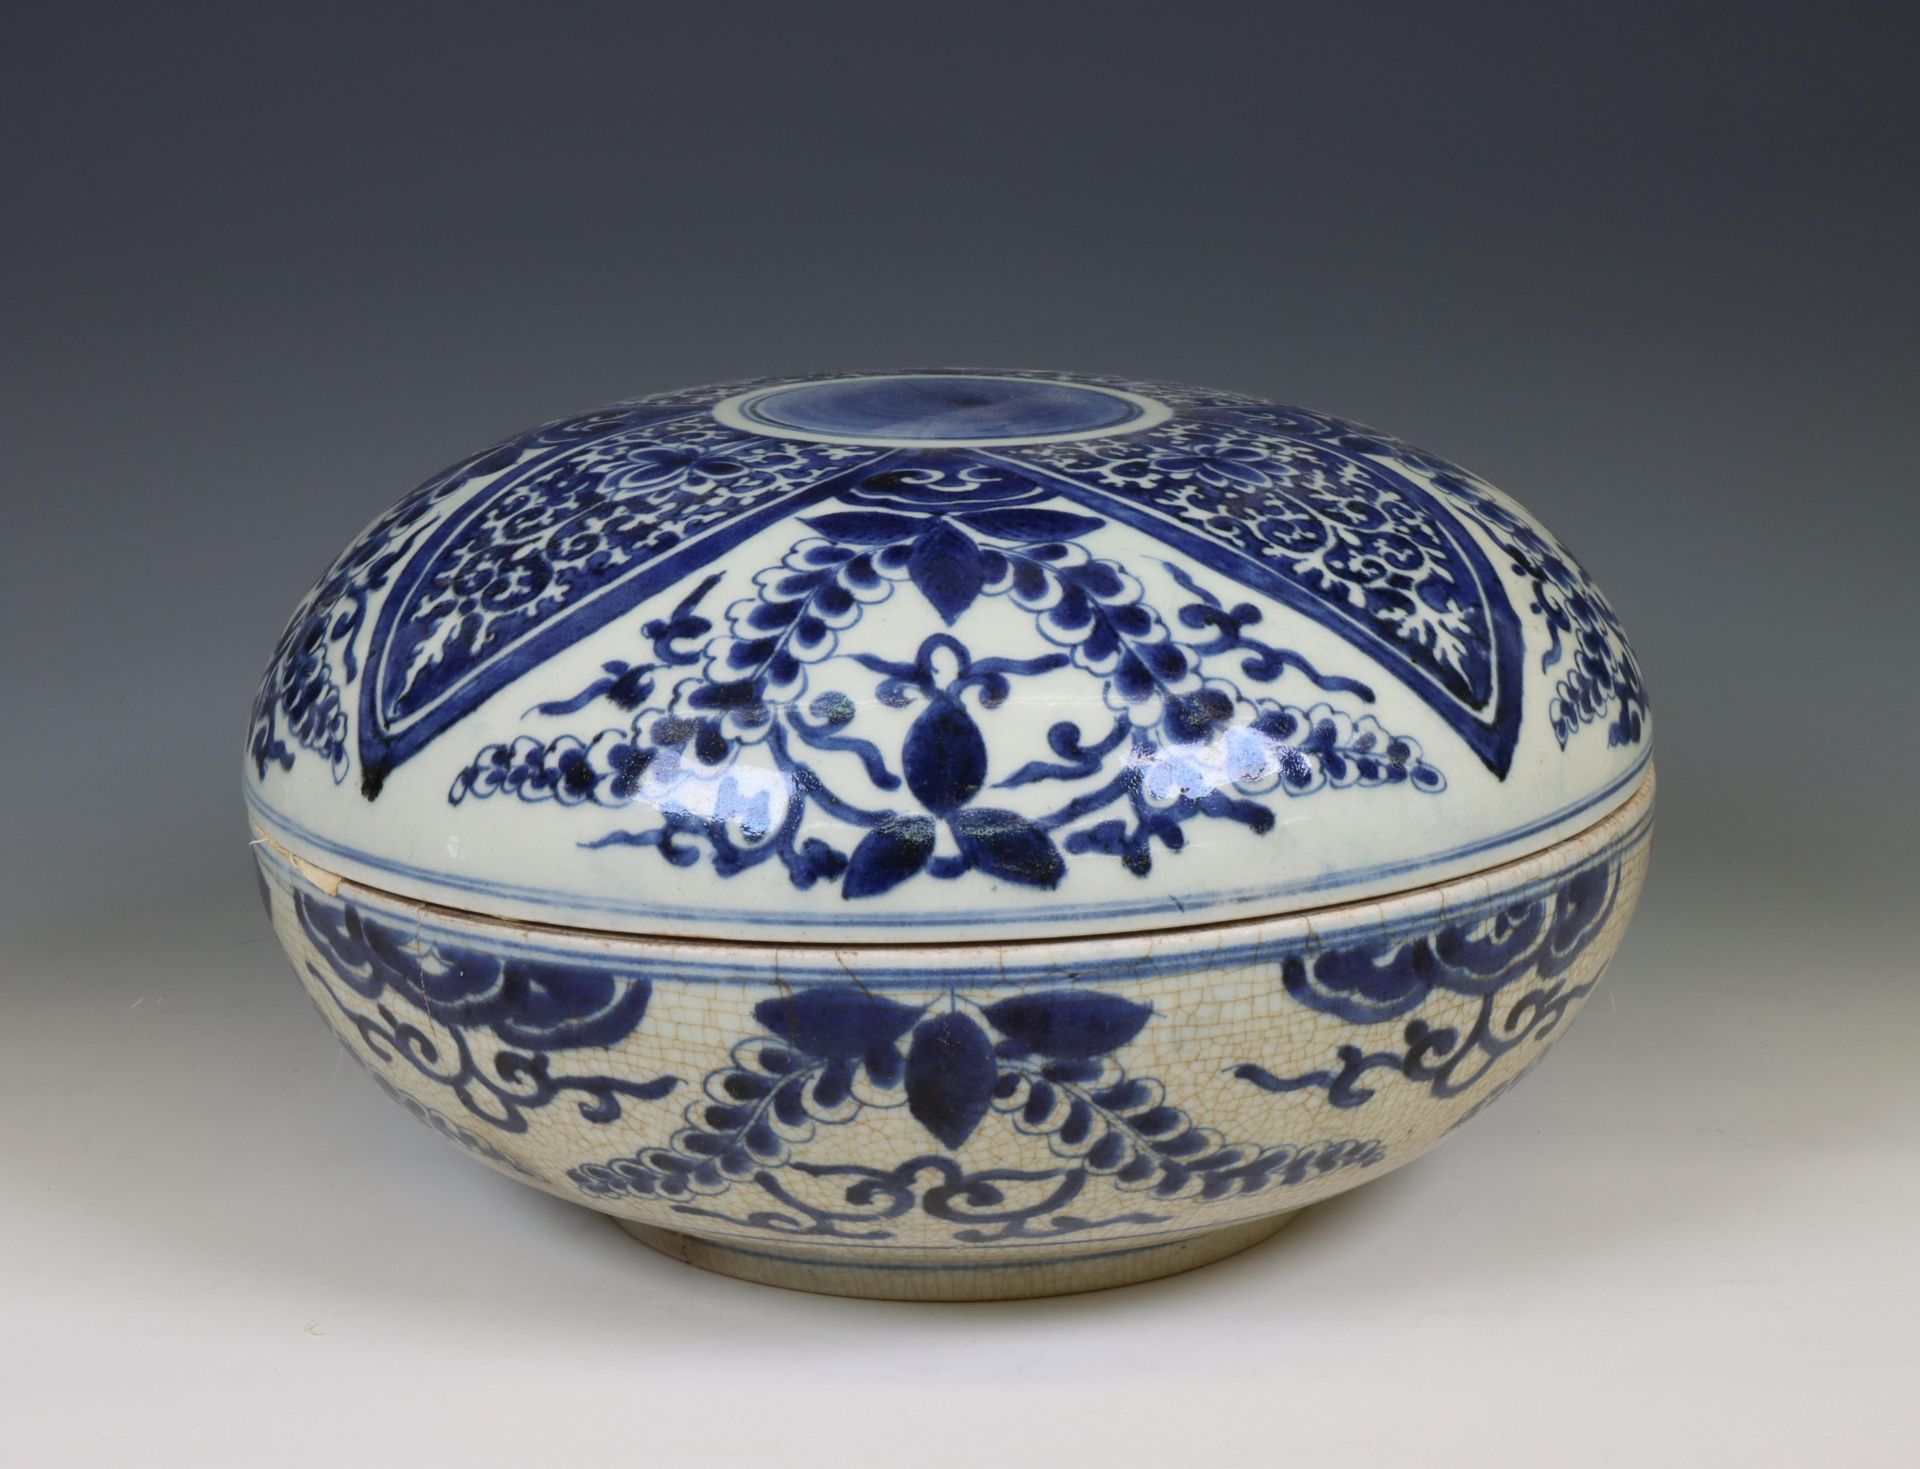 China, blue and white porcelain box and cover, late Qing dynasty (1644-1912),